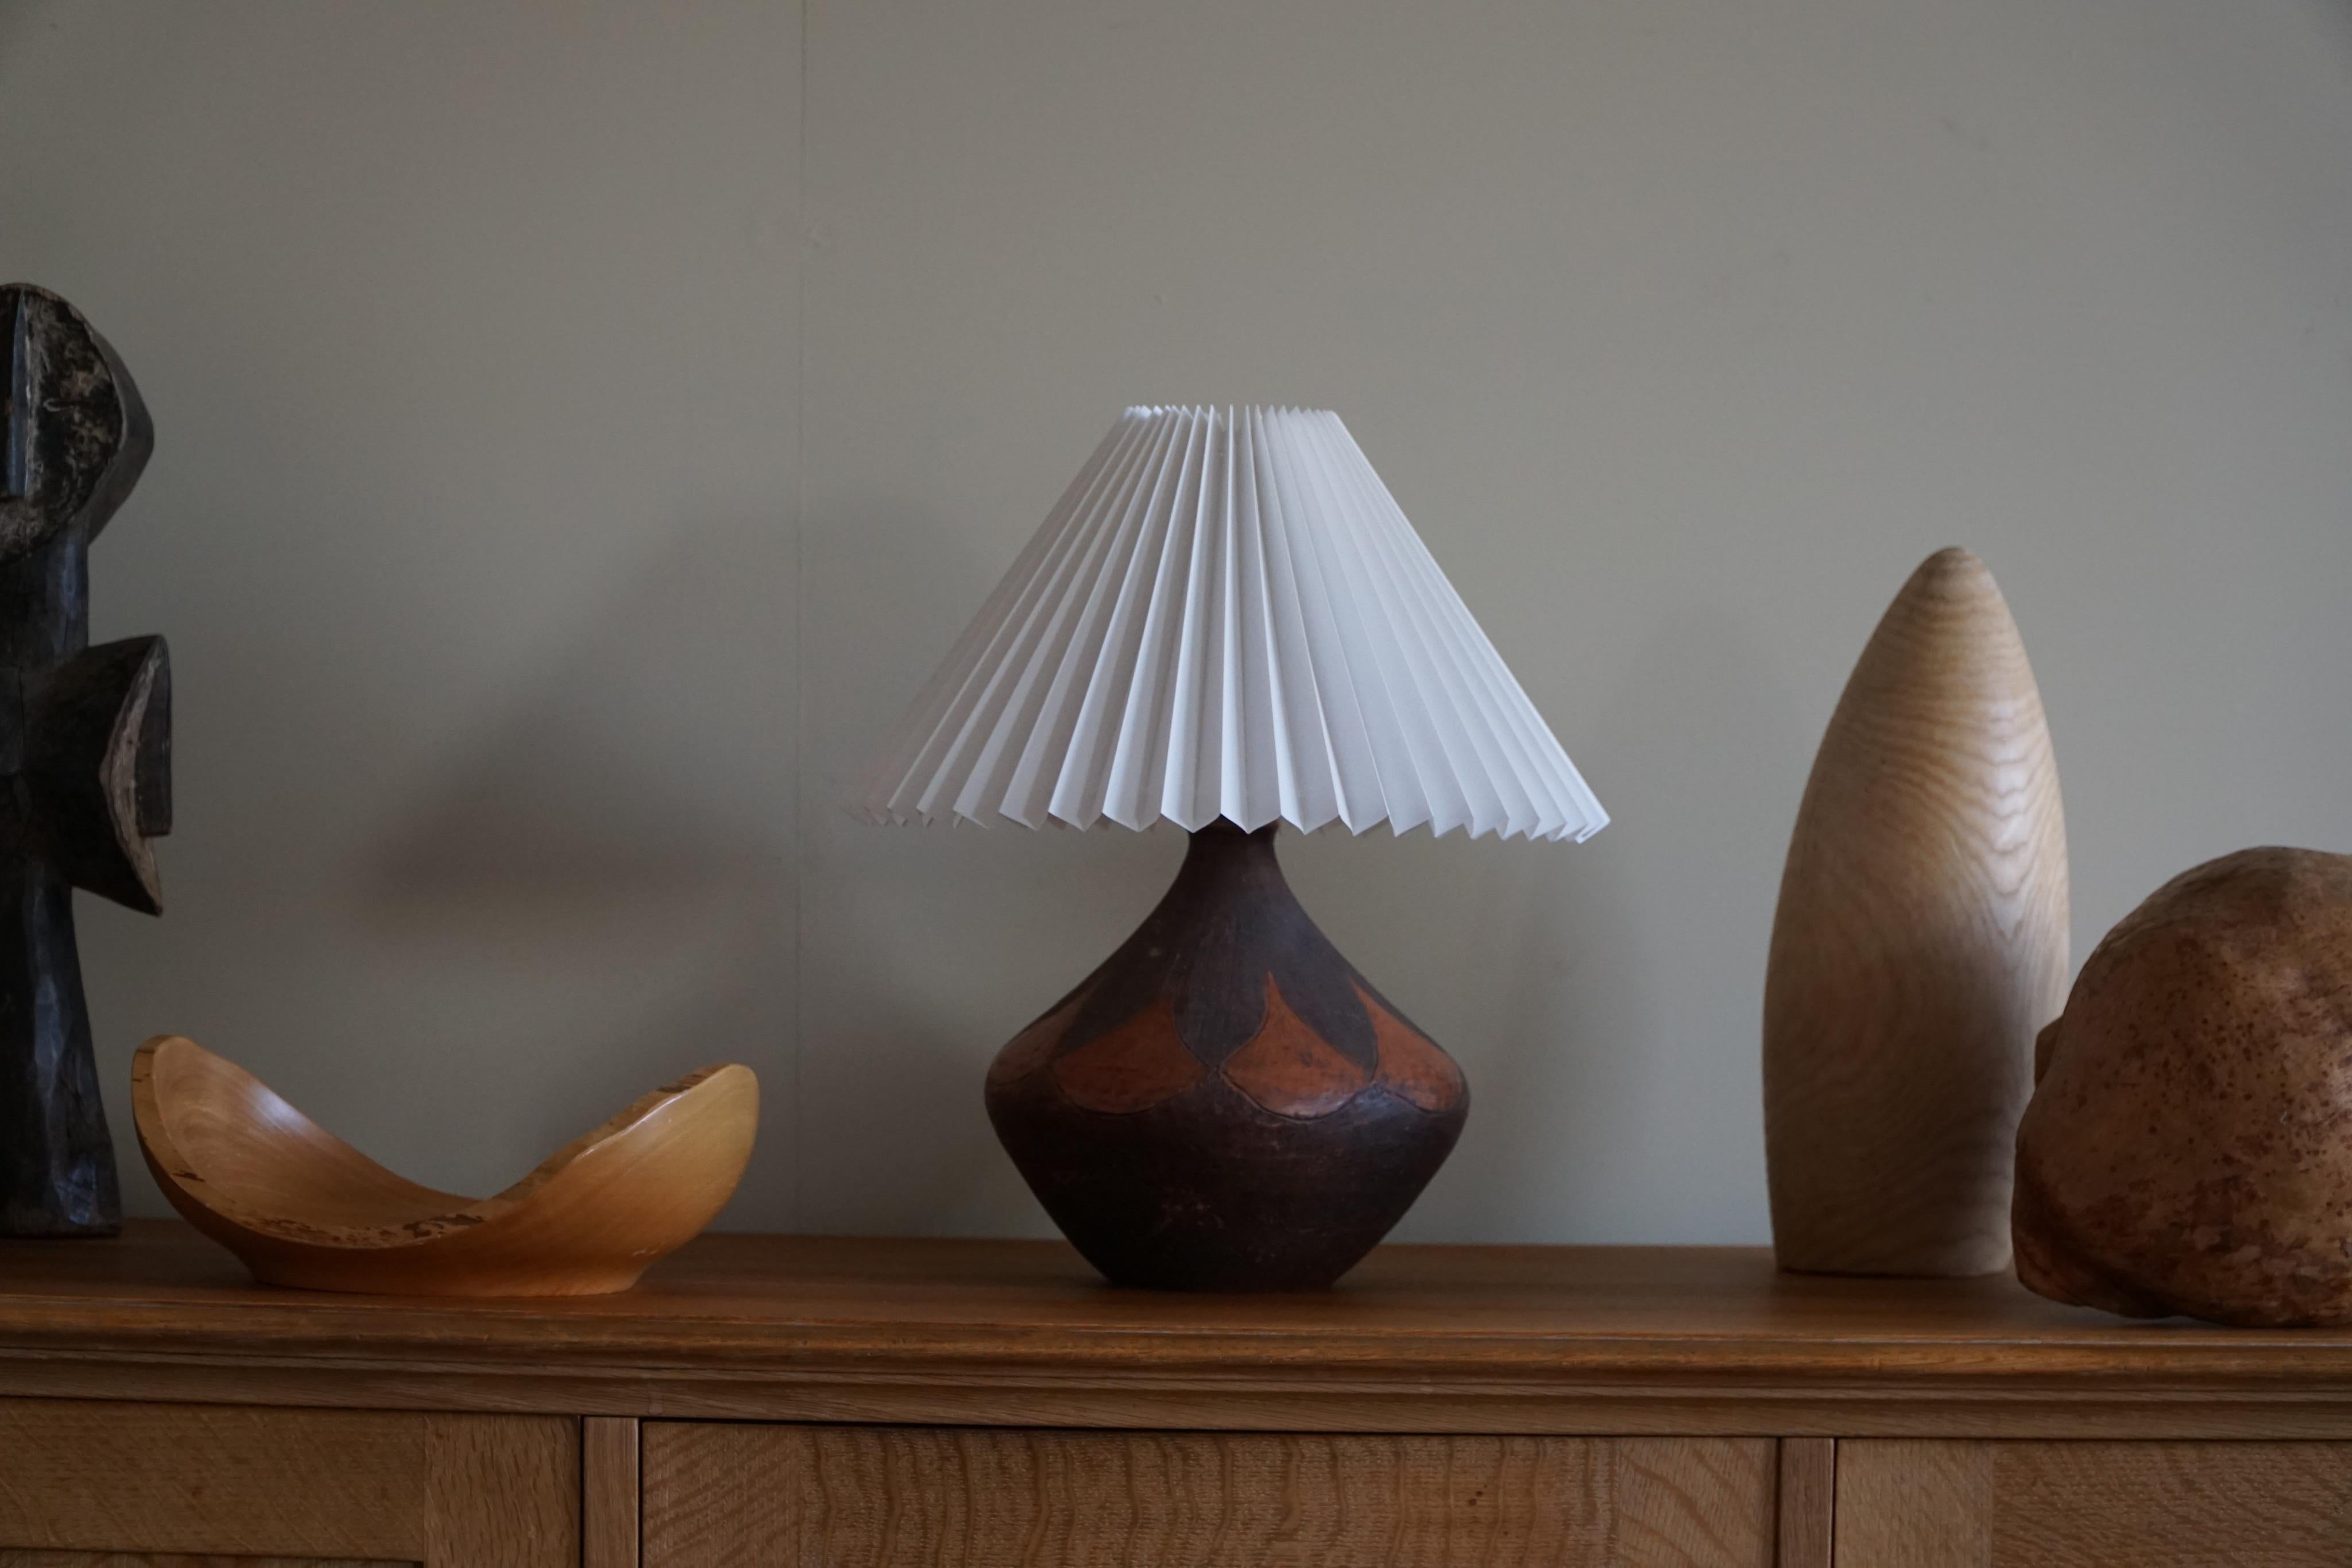 A fantastic mid-20th century round ceramic table lamp with beautiful patterns in various orange/brown colors. Made in Denmark in the 1950s. A beautiful shape that make it well suited for the Modern interior or Scandinavian lifestyle.

NB: Doesn't